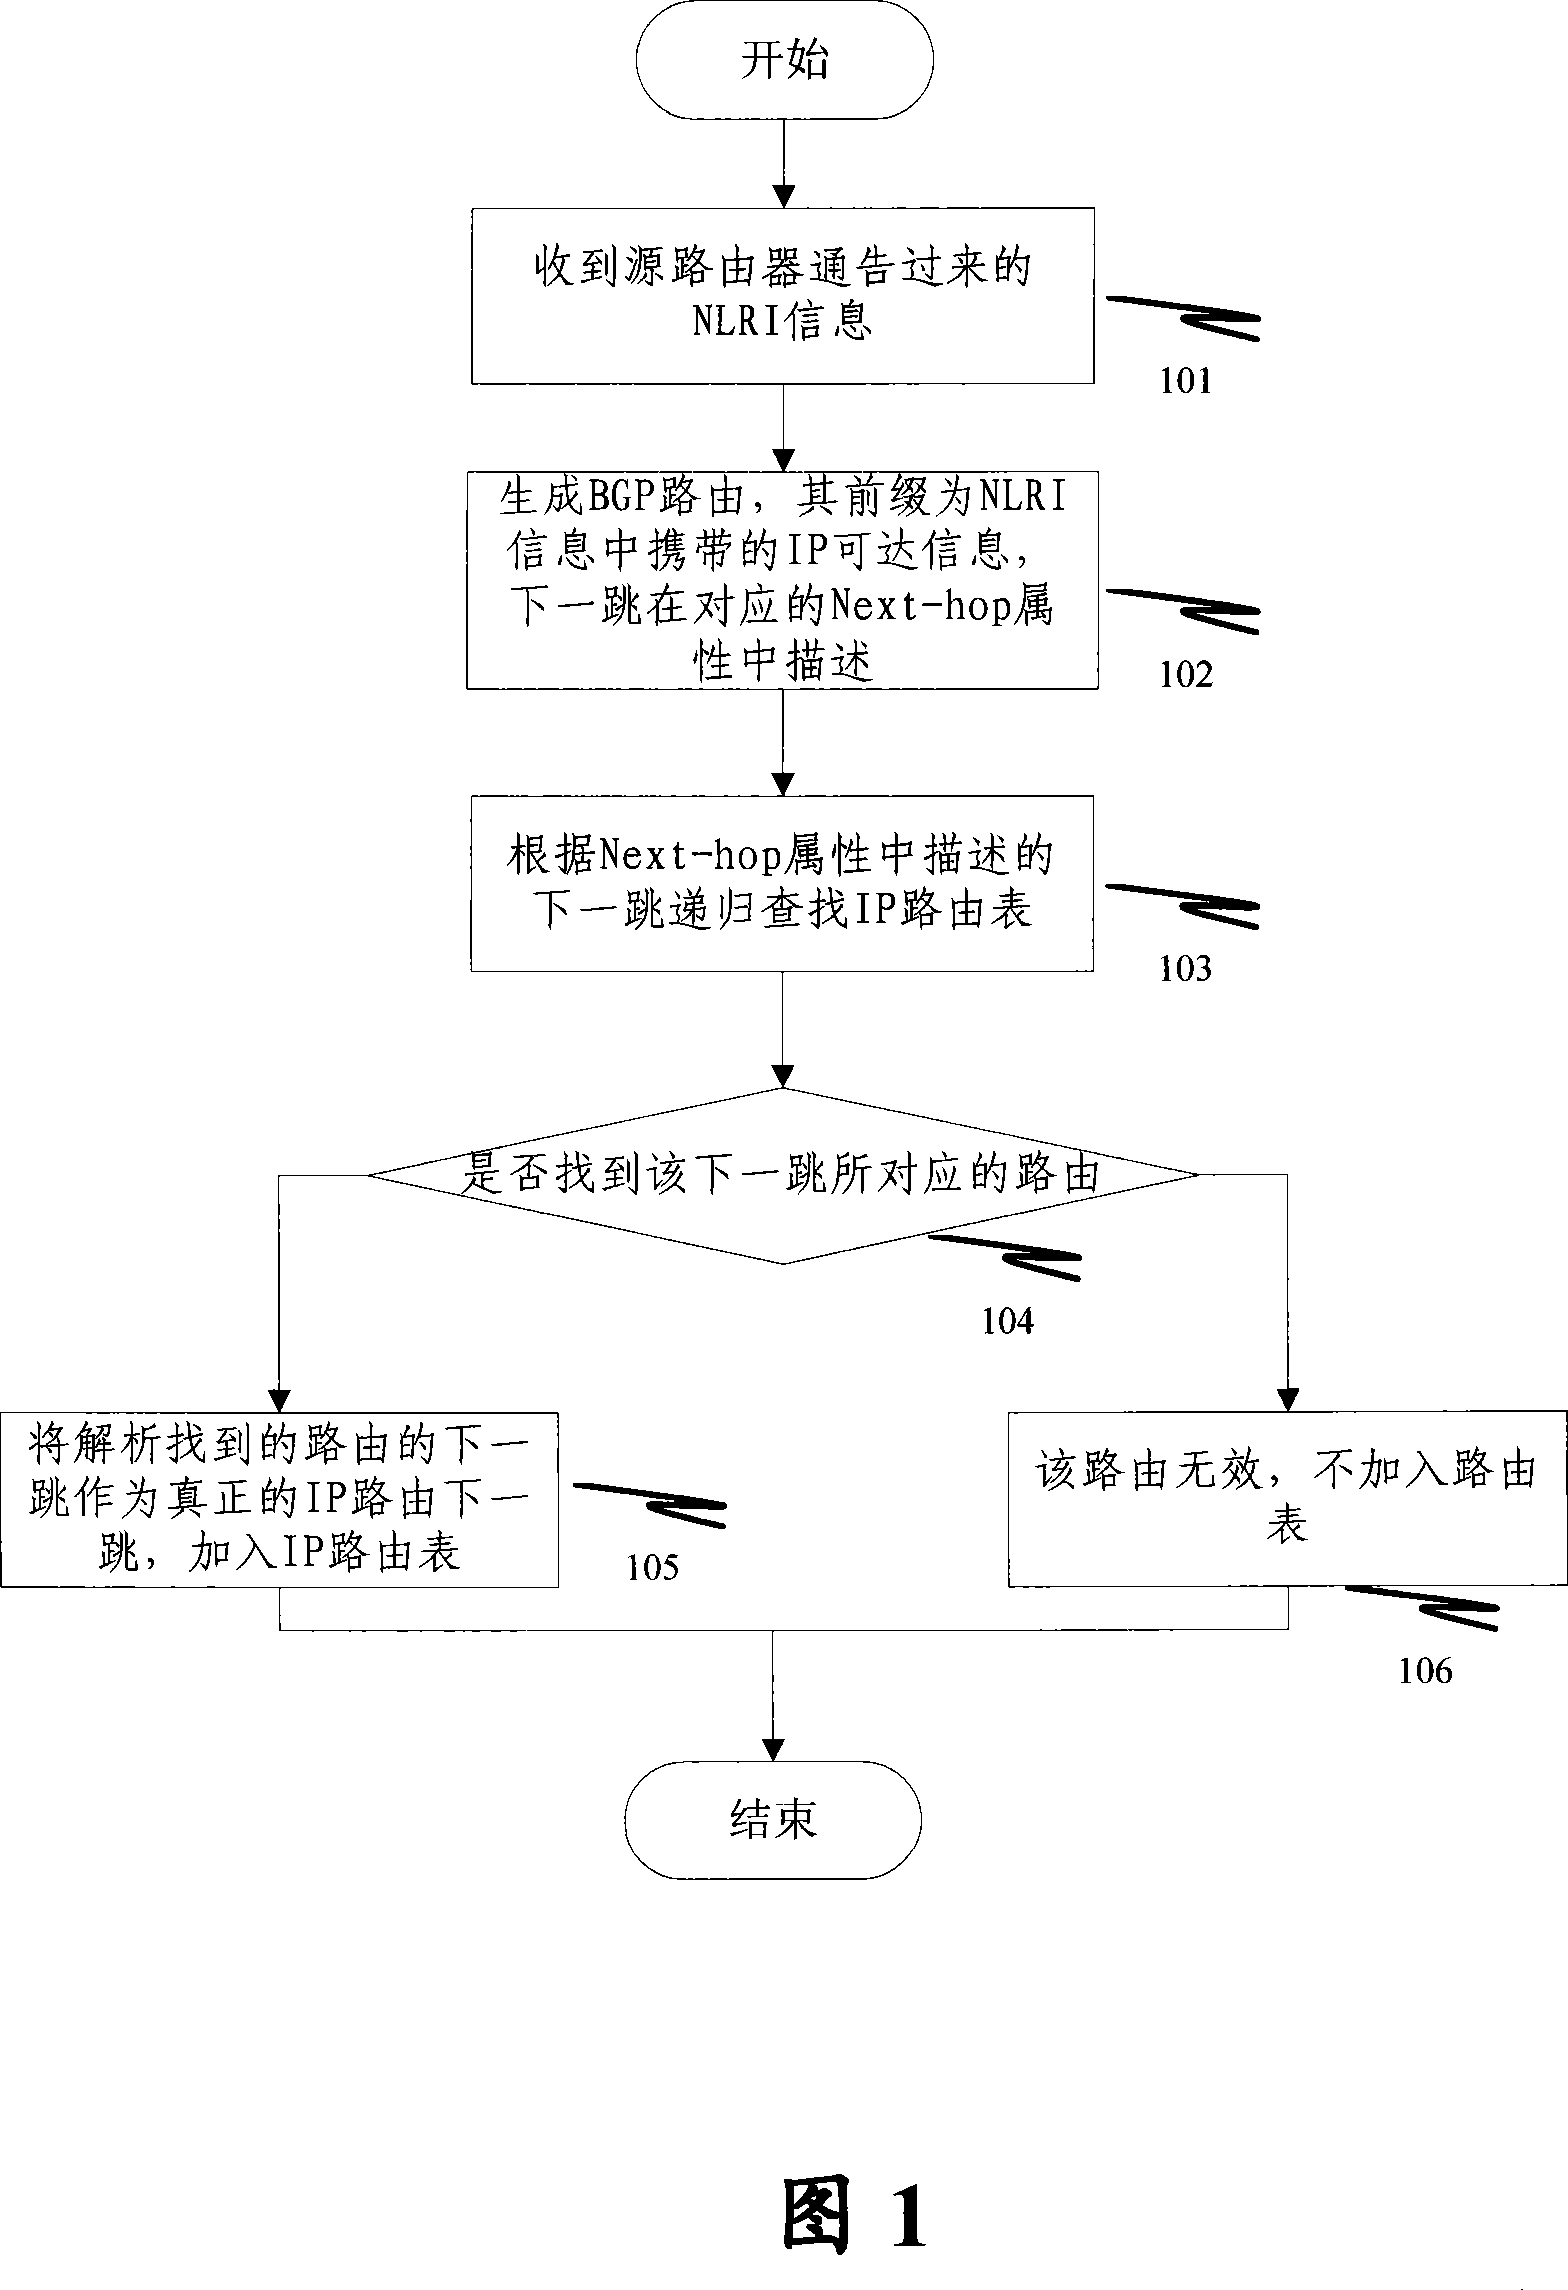 Method for updating boundary gate protocol recursion router